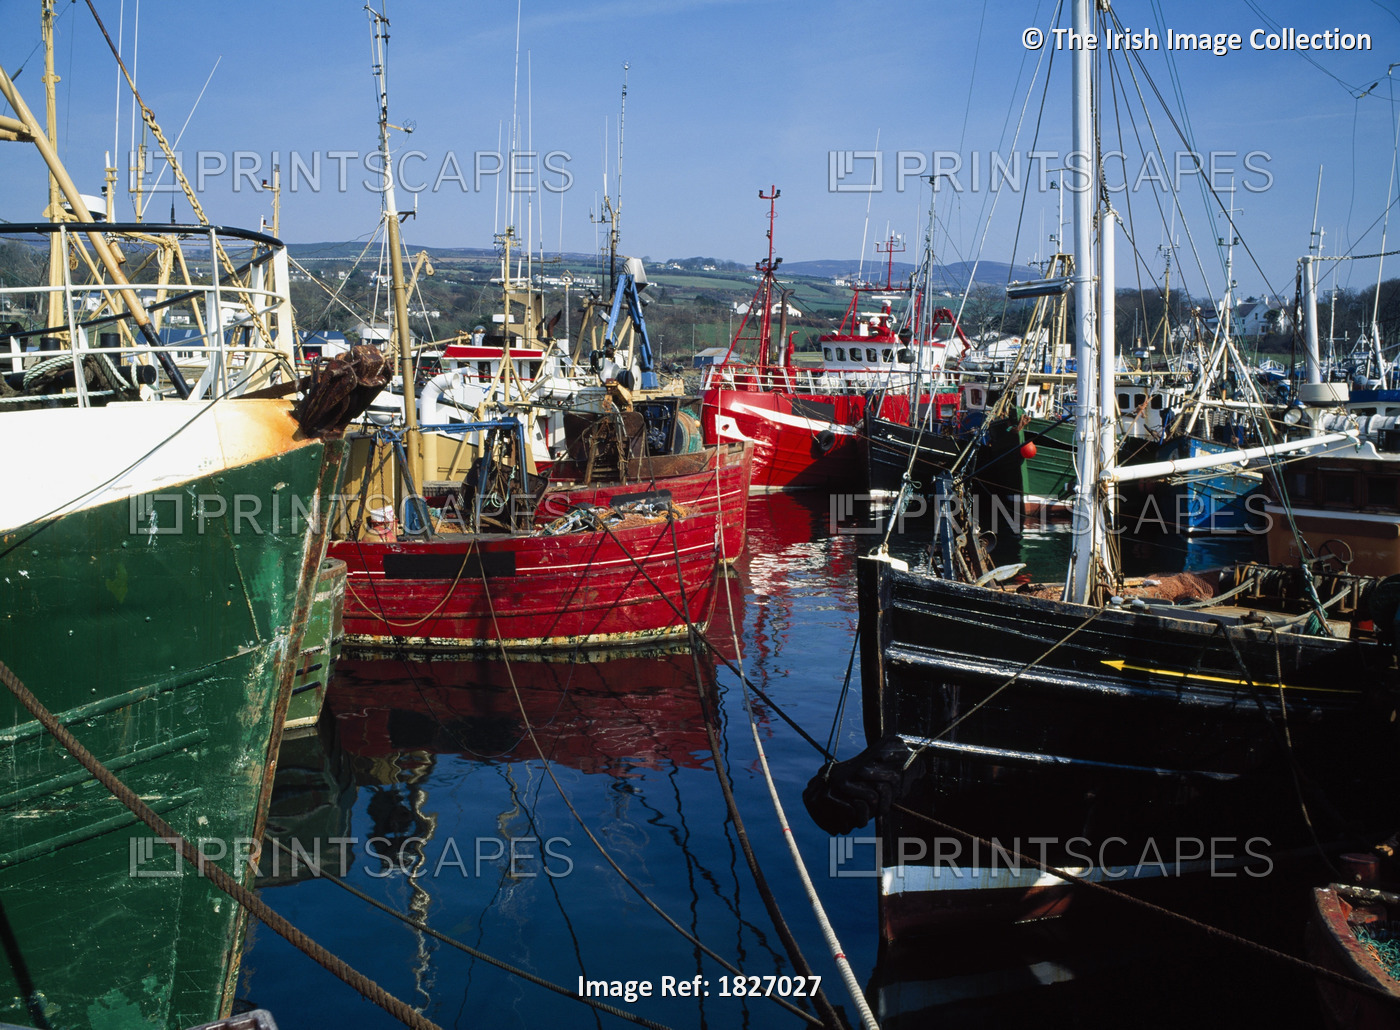 Greencastle, Lough Foyle, Co Donegal, Ireland; Boats At A Commercial Fishing ...